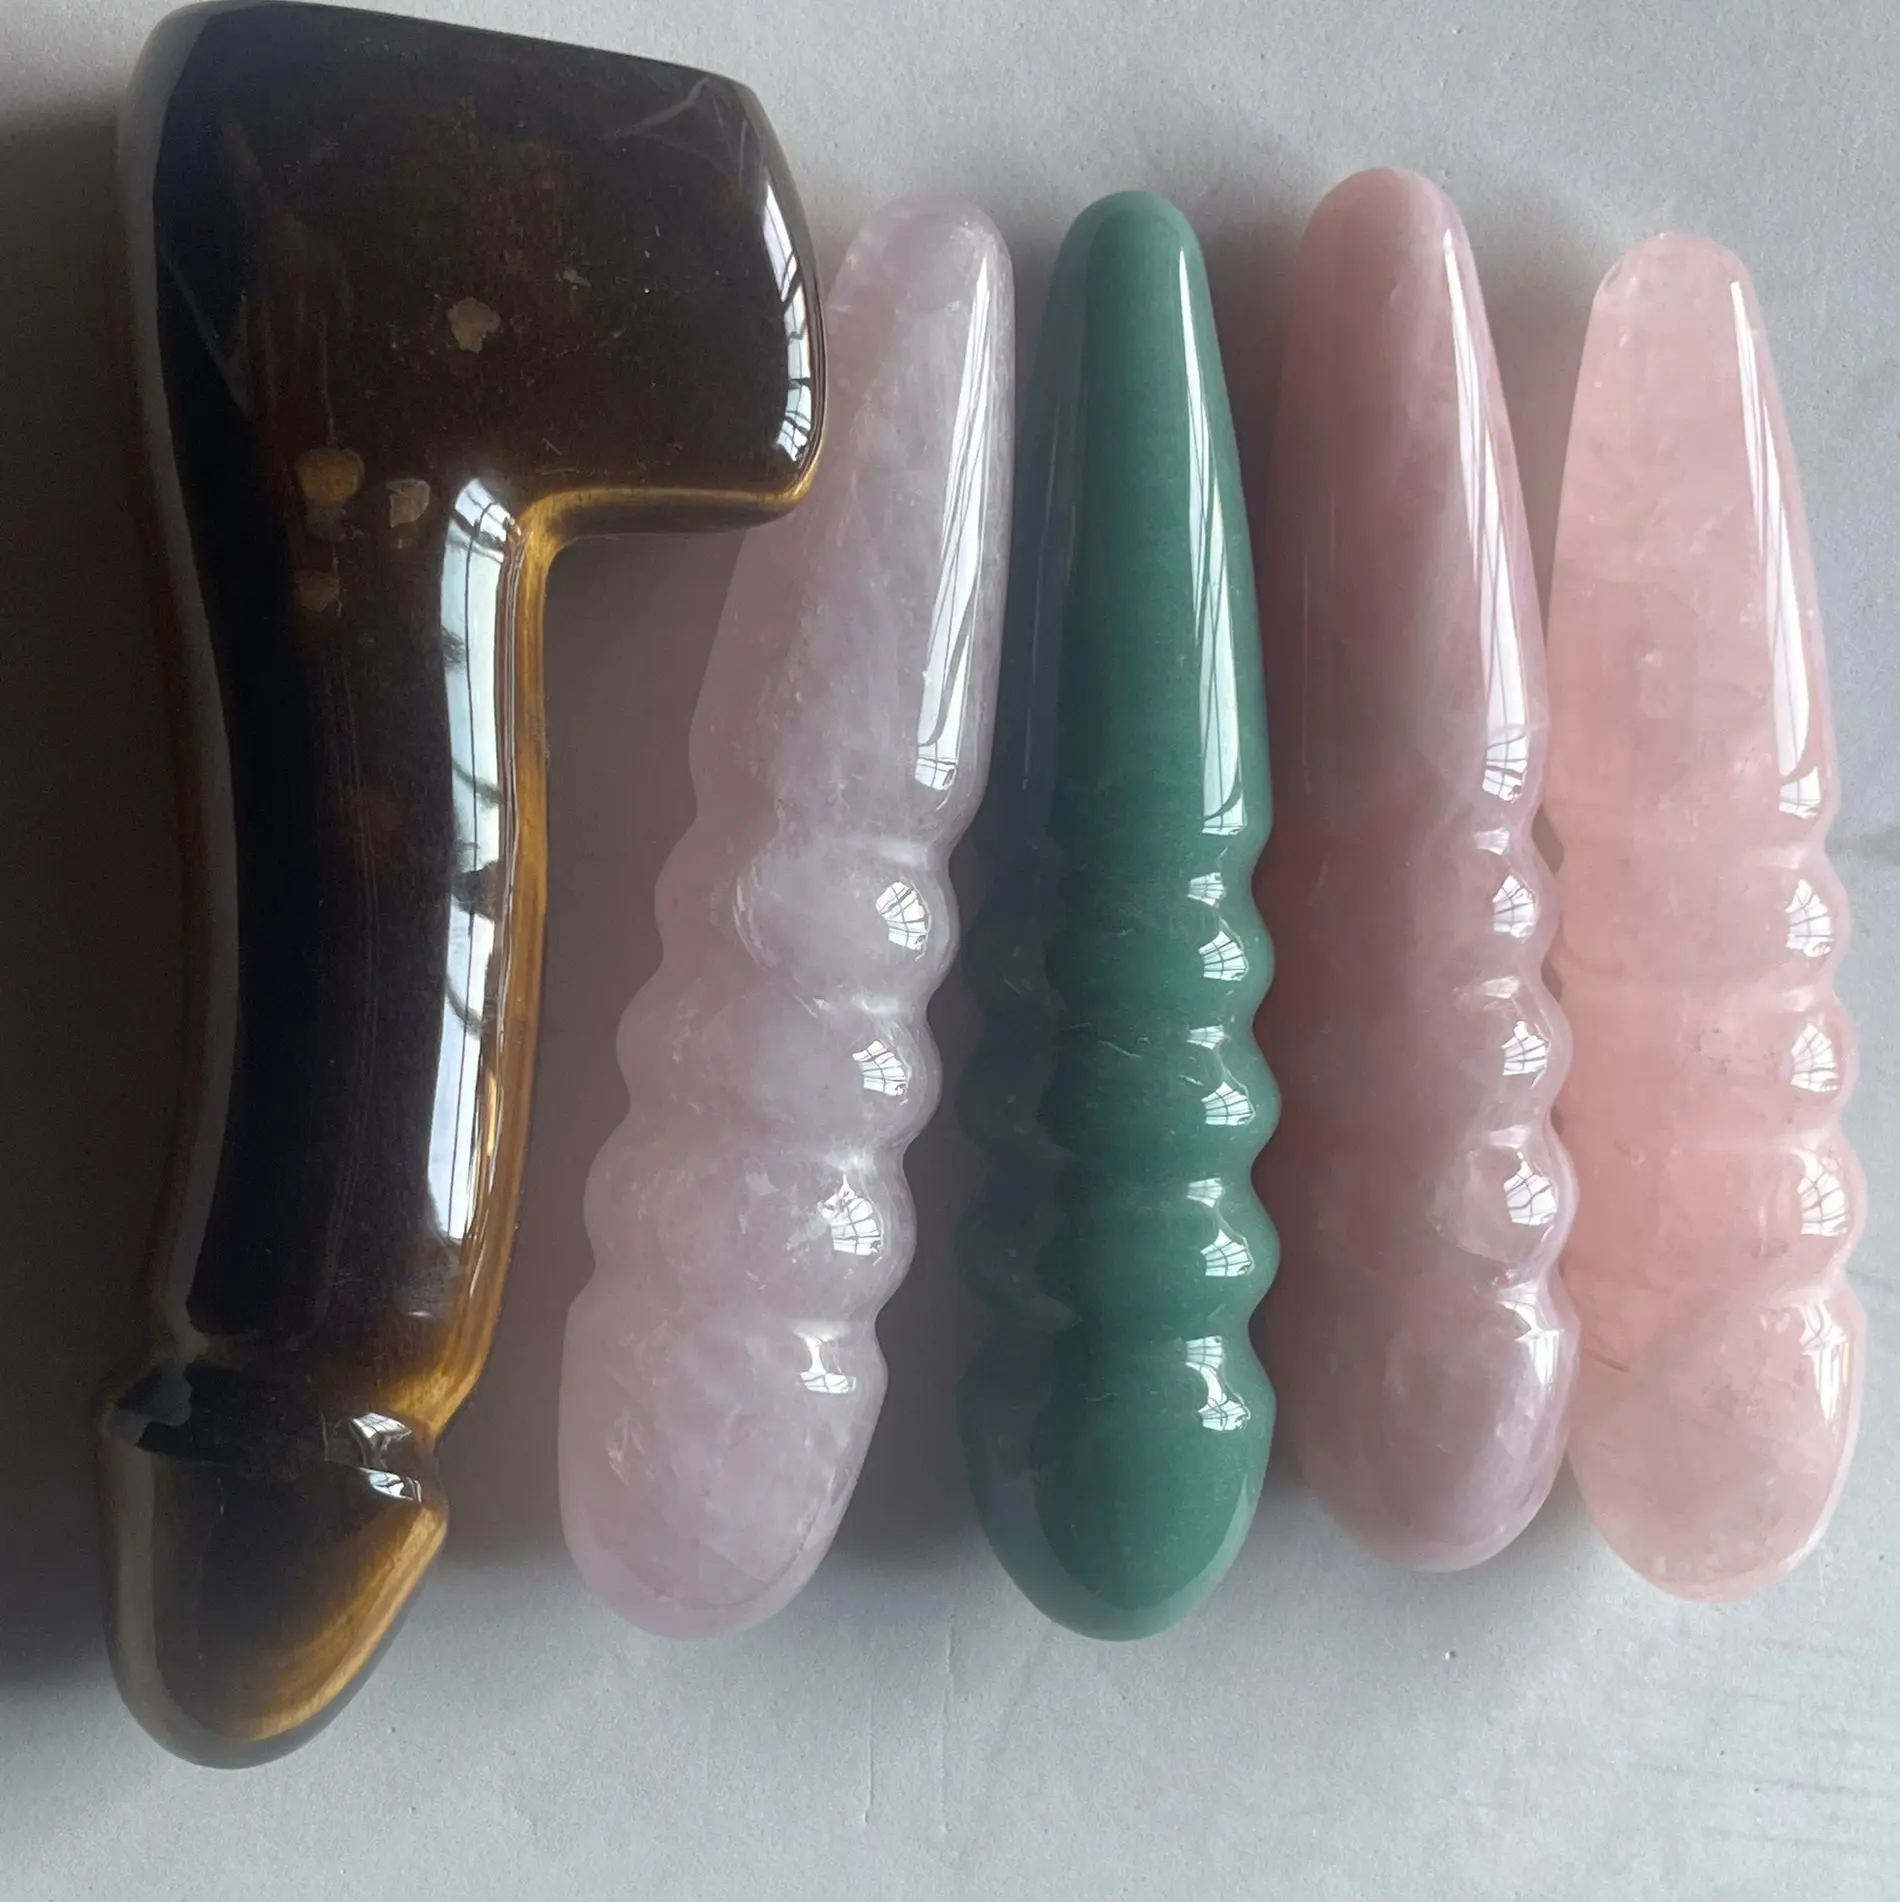 News Super realistic Natural Crystal Massage Wand Used For Yoni